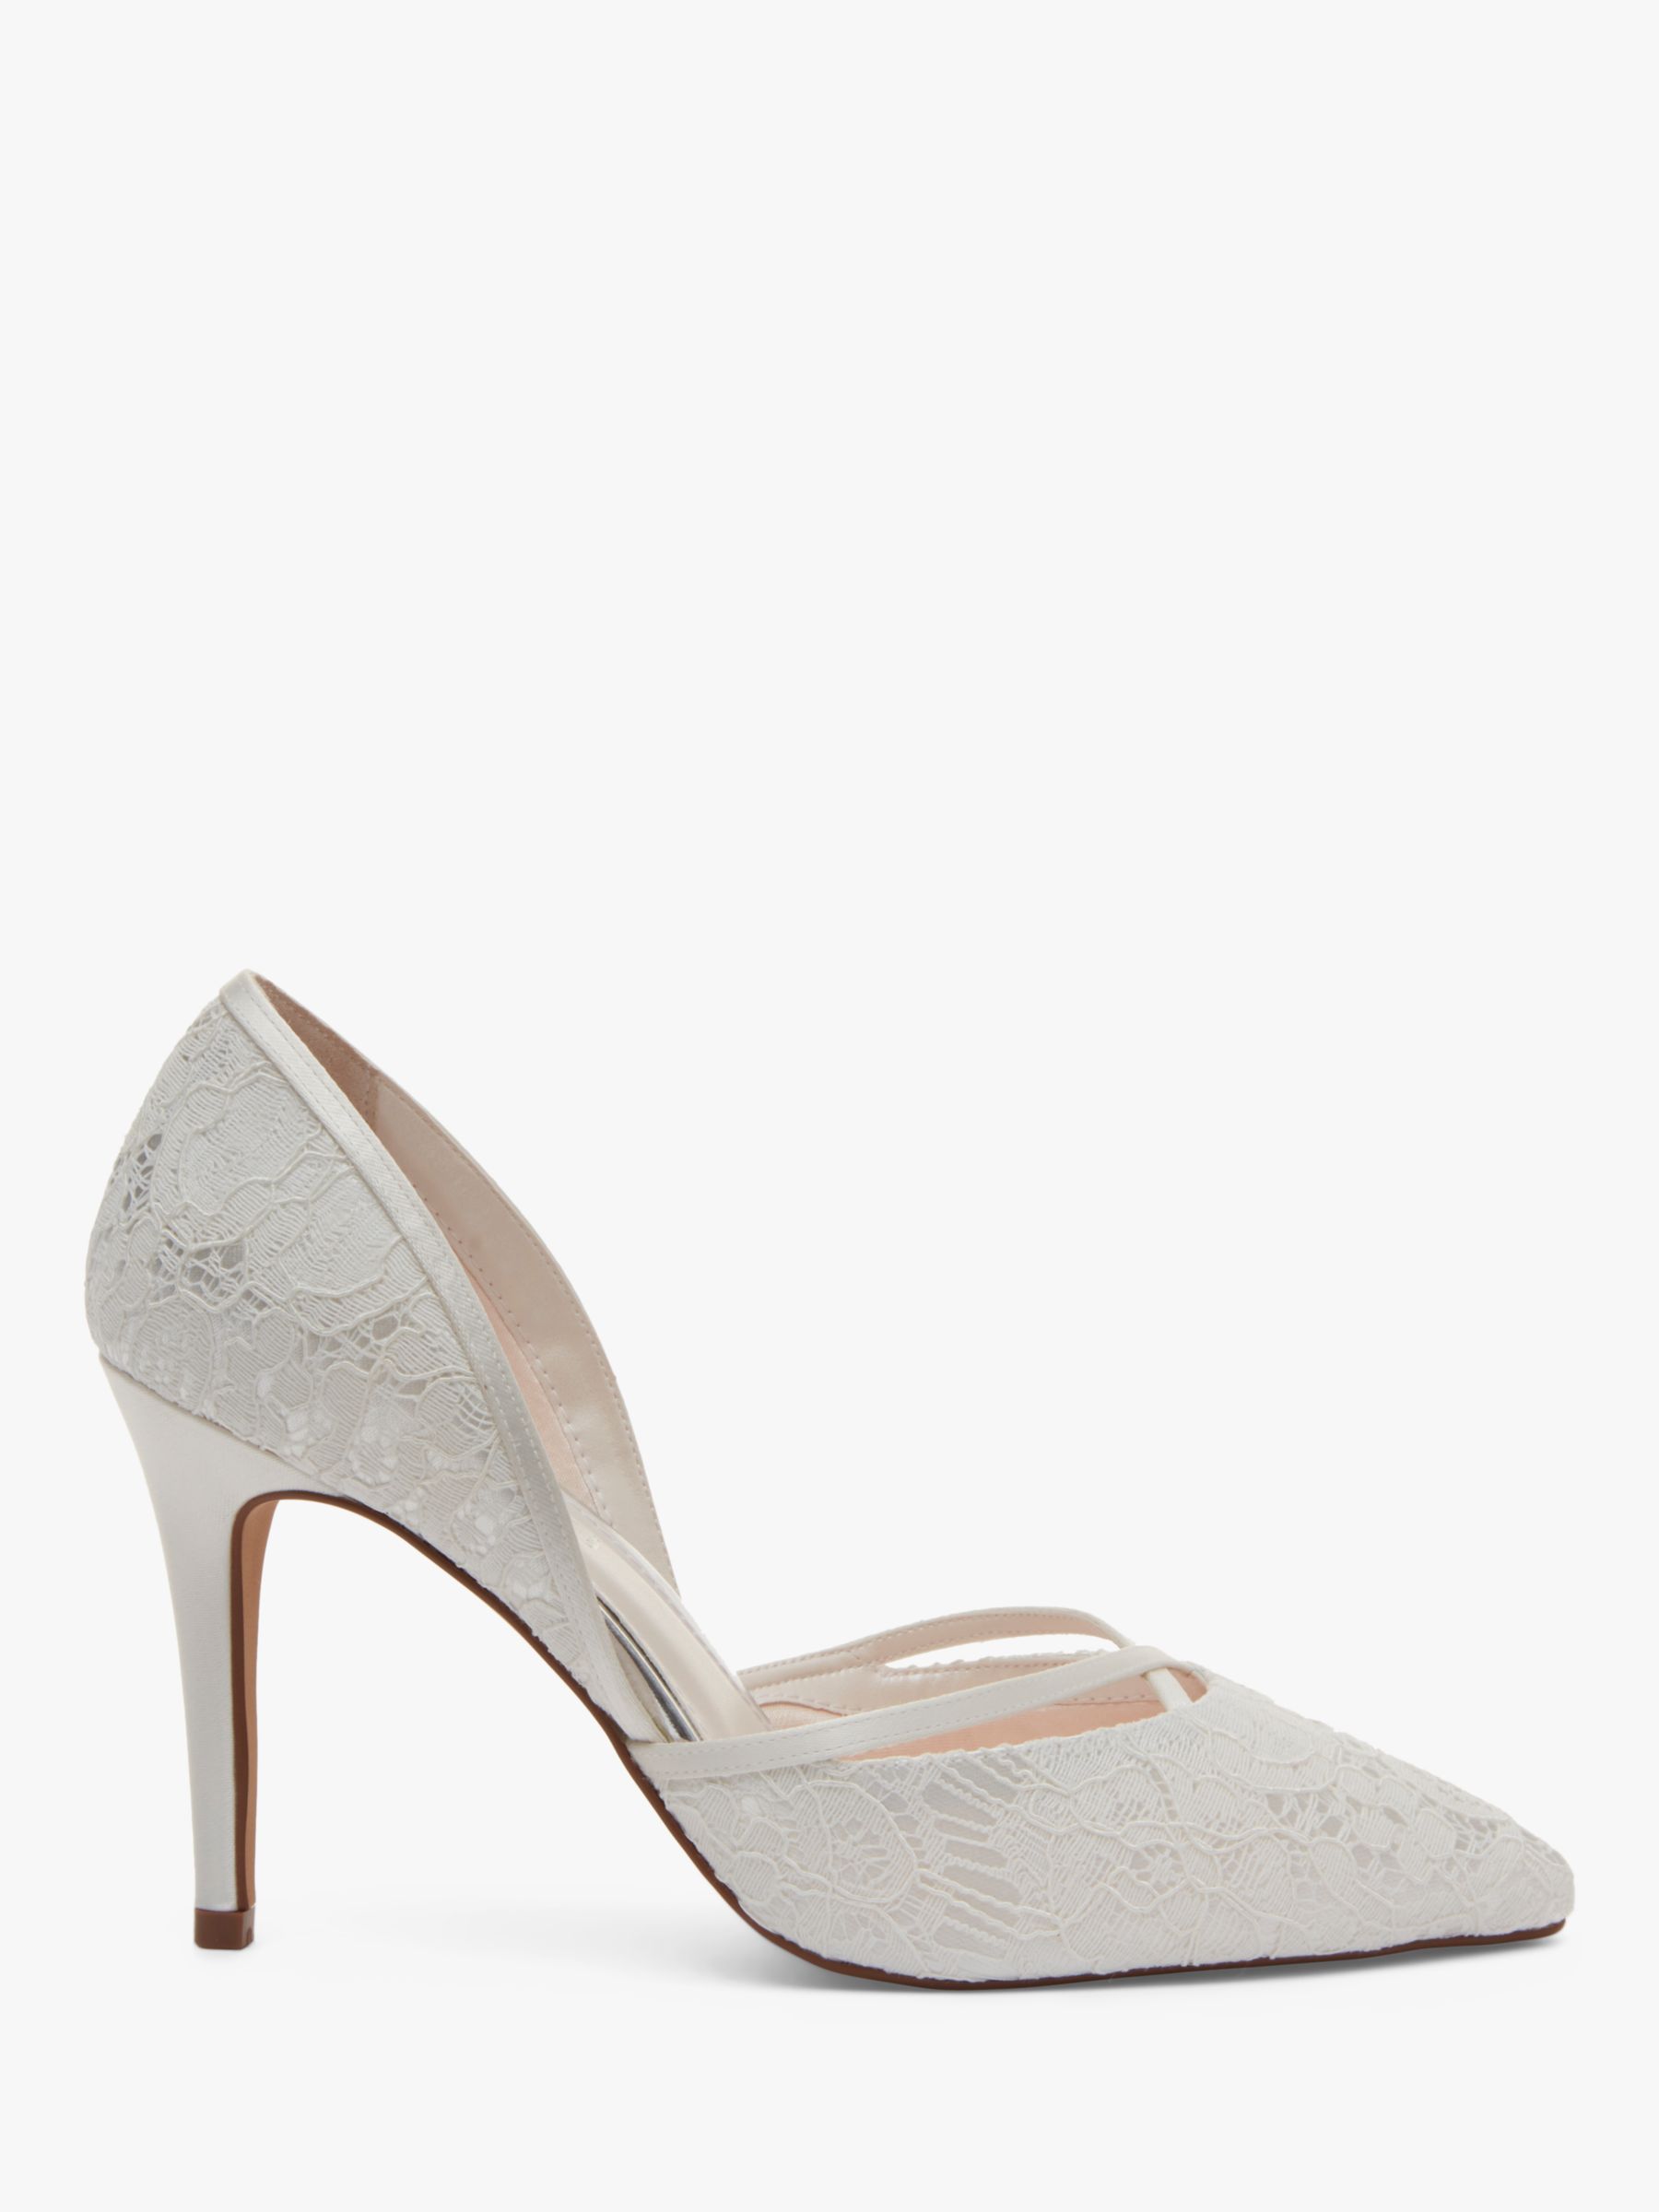 Rainbow Club Georgia Luxury Lace Pointed Court Shoes, Ivory